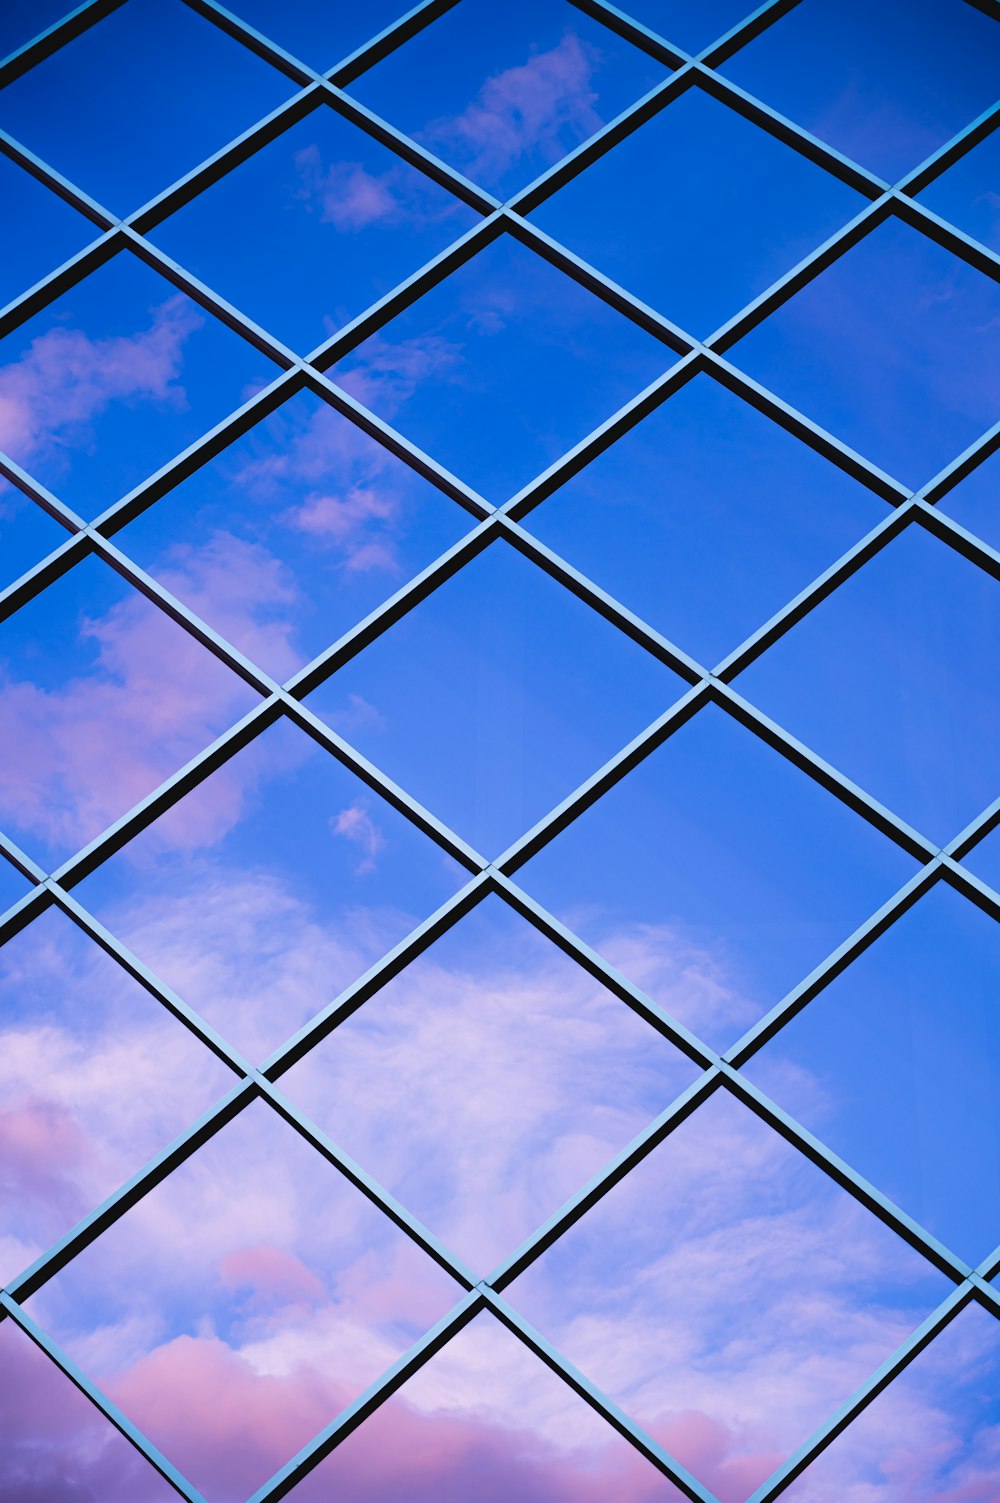 a view of the sky through a metal grid